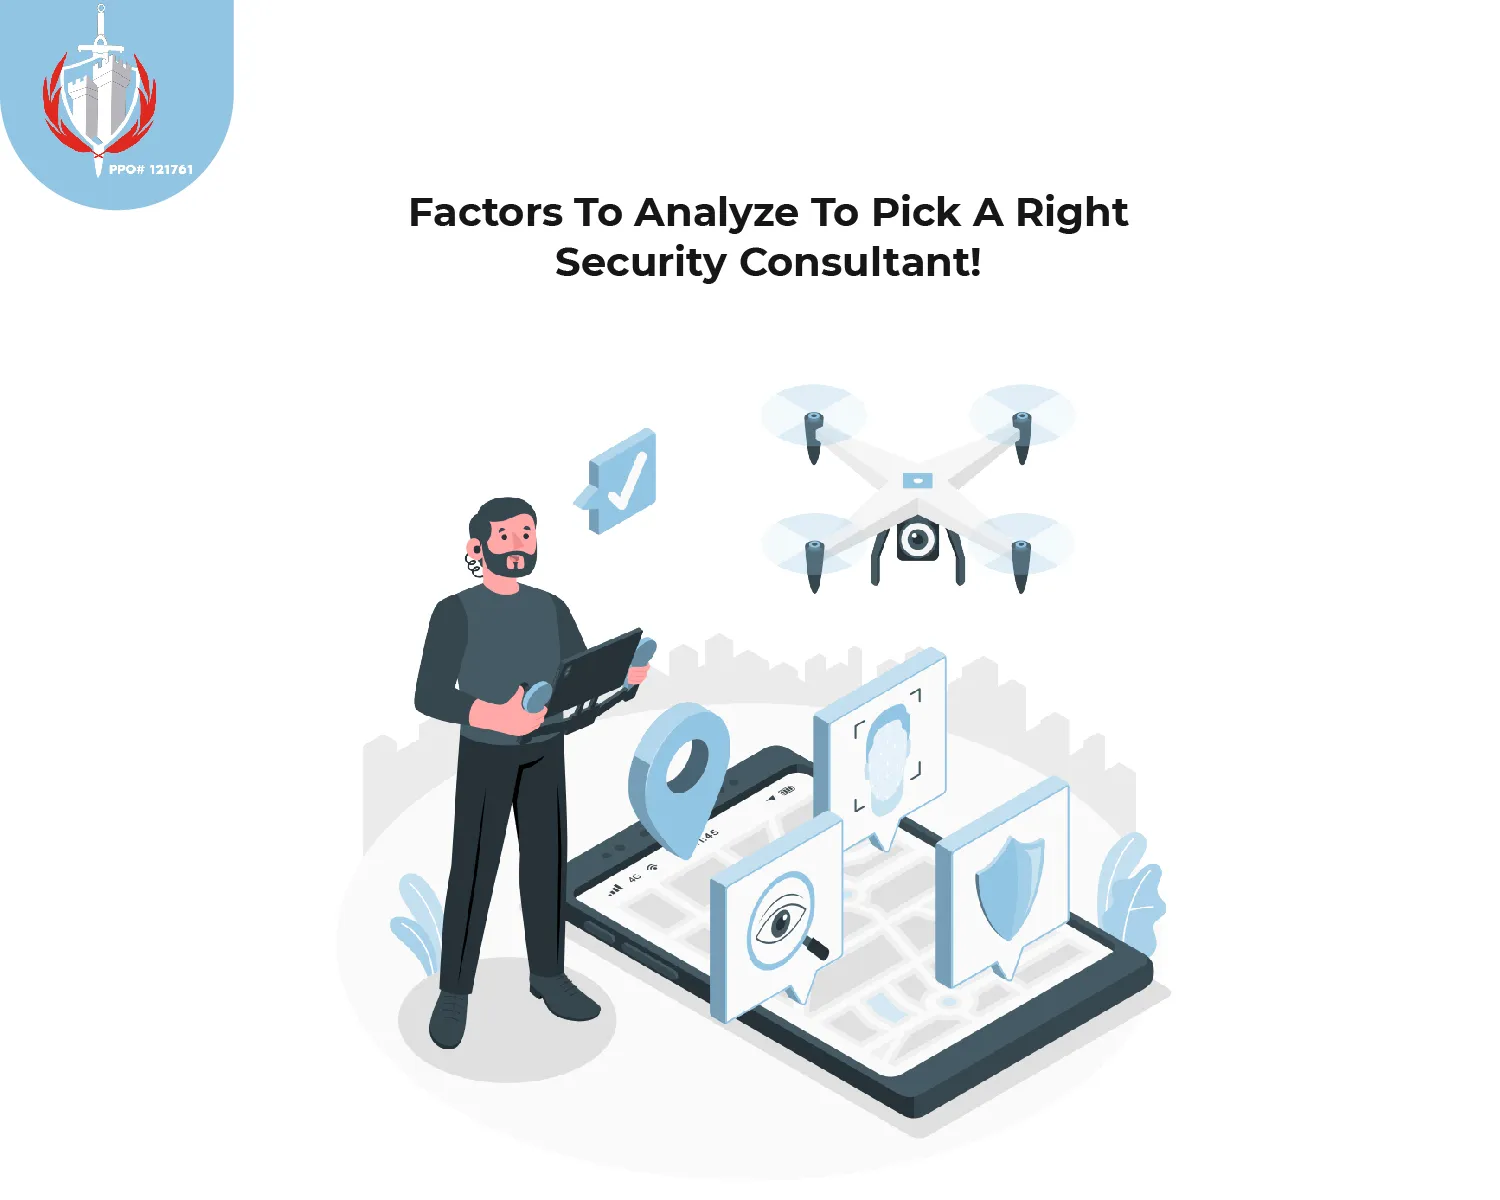 Factors To Analyze To Pick A Right Security Consultant!